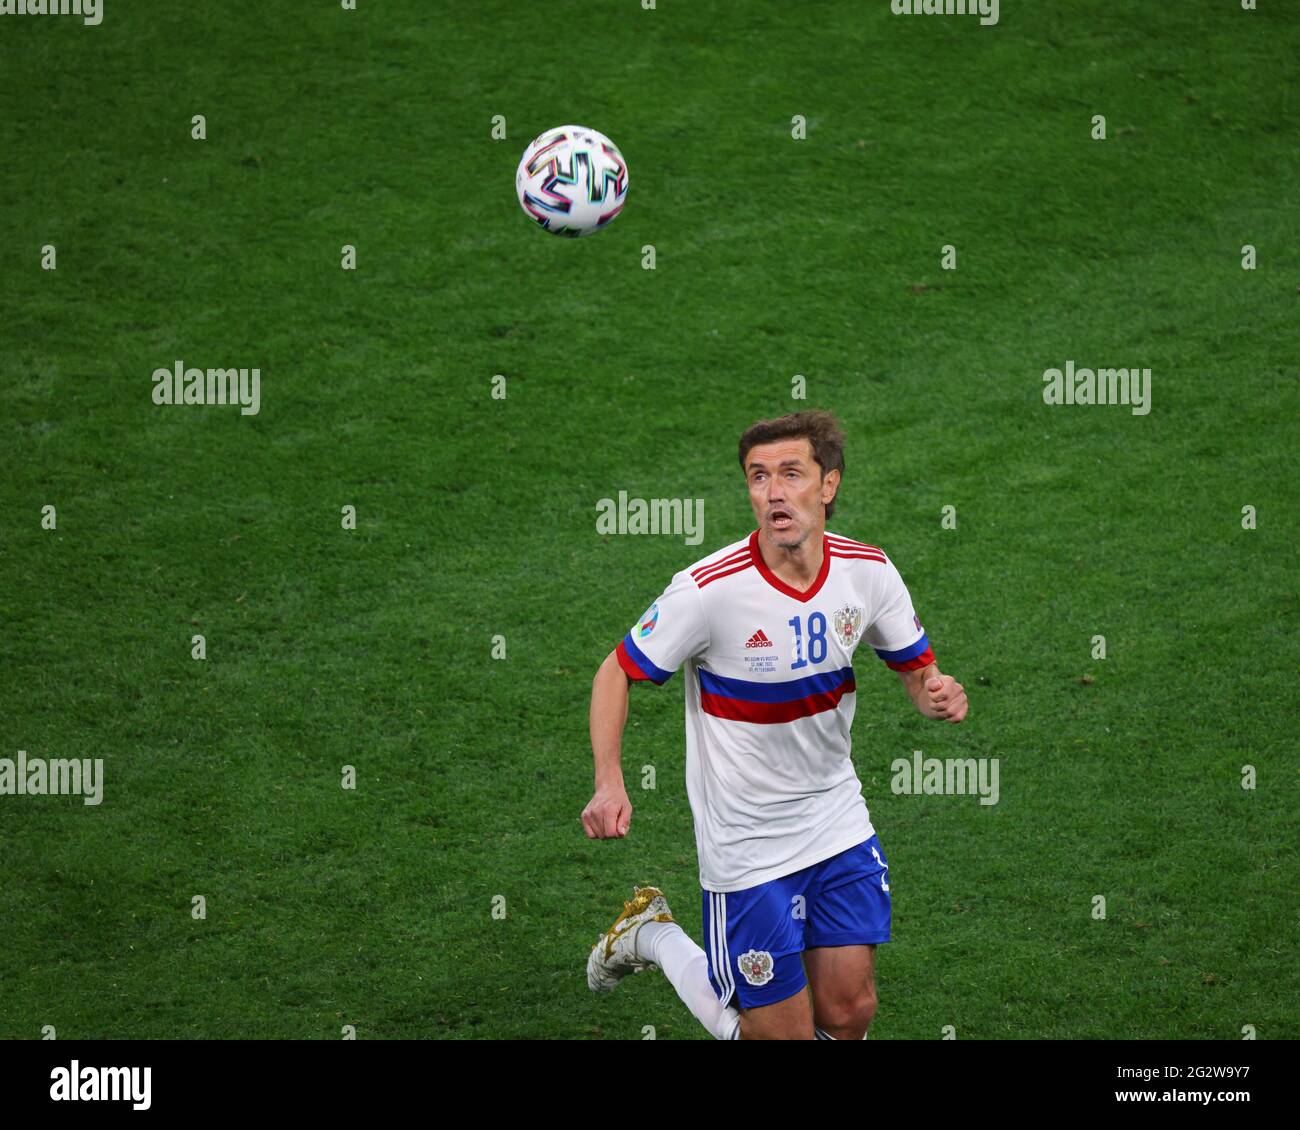 Saint Petersburg, Russia. 12th June, 2021. Yuri Zhirkov (18) of Russia seen in action during the European championship EURO 2020 between Russia and Belgium at Gazprom Arena.(Final Score; Russia 0:3 Belgium). (Photo by Maksim Konstantinov/SOPA Images/Sipa USA) Credit: Sipa USA/Alamy Live News Stock Photo